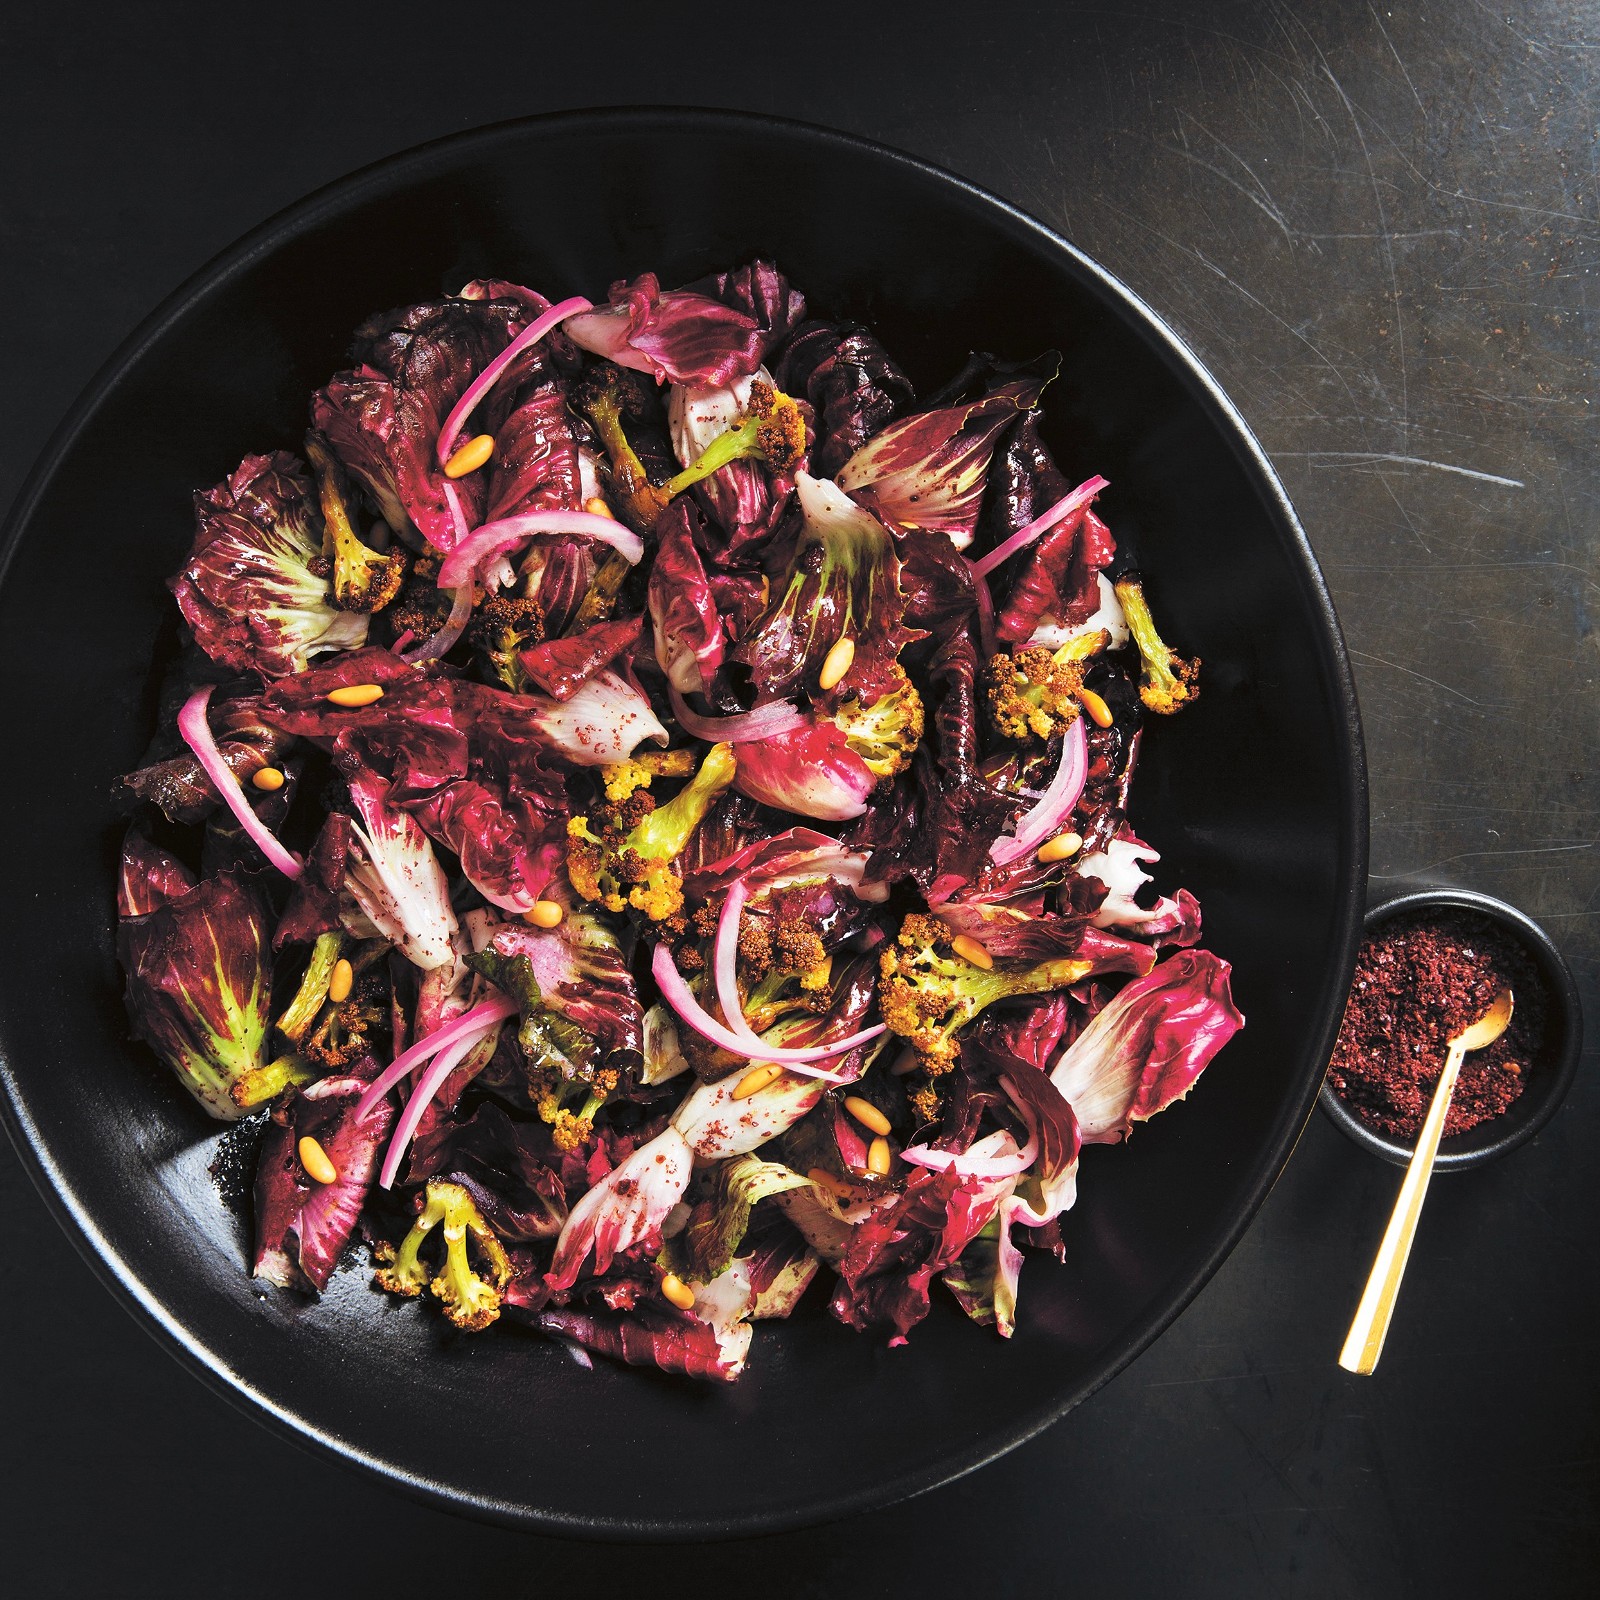 Image of Hearty Cauliflower and Radicchio Salad with Pine Nuts, Barberries, and Sumac